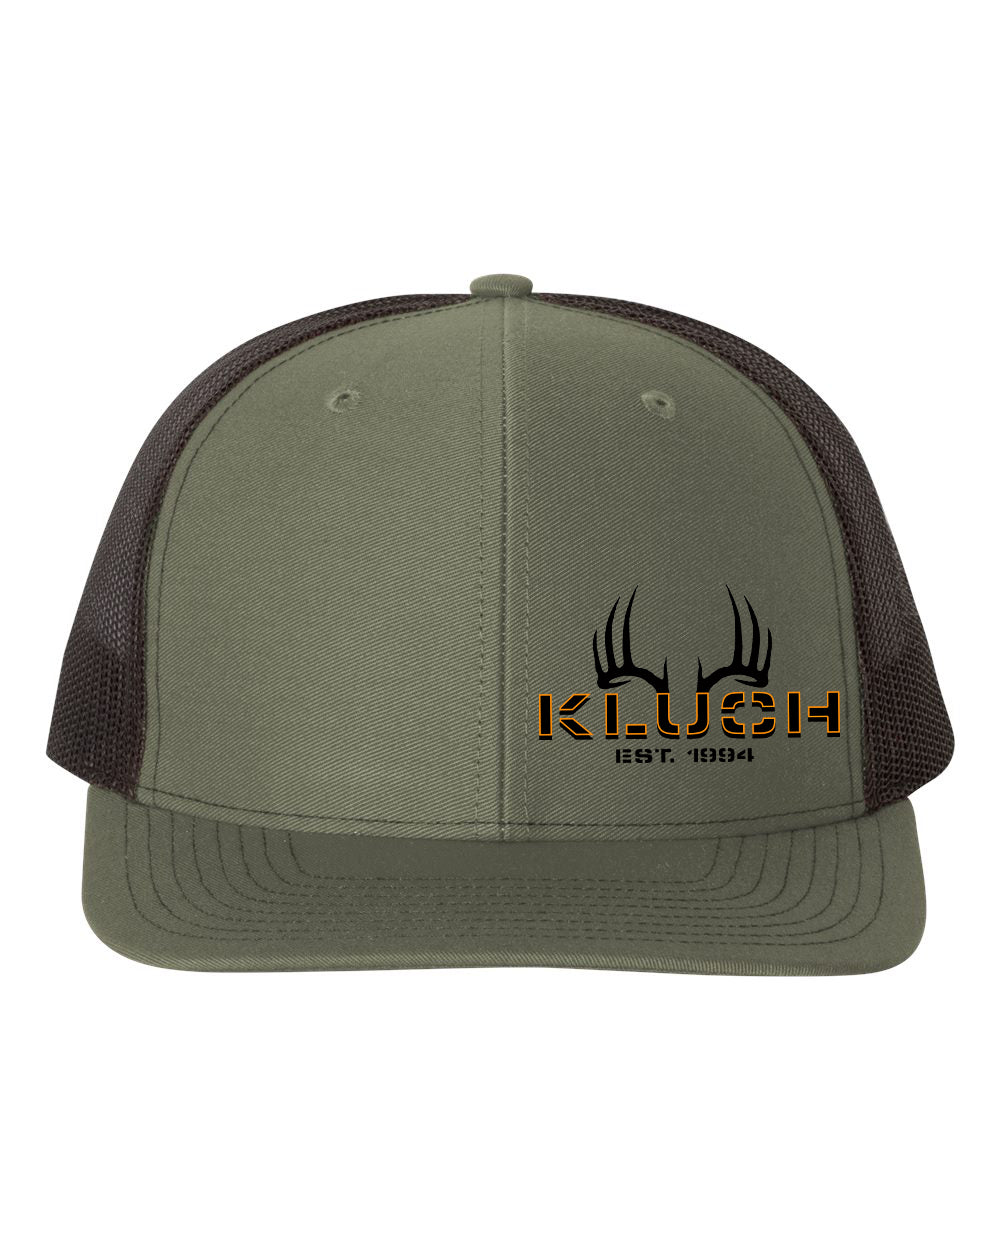 Kluch Adjustable Hats - Kluch Apparel